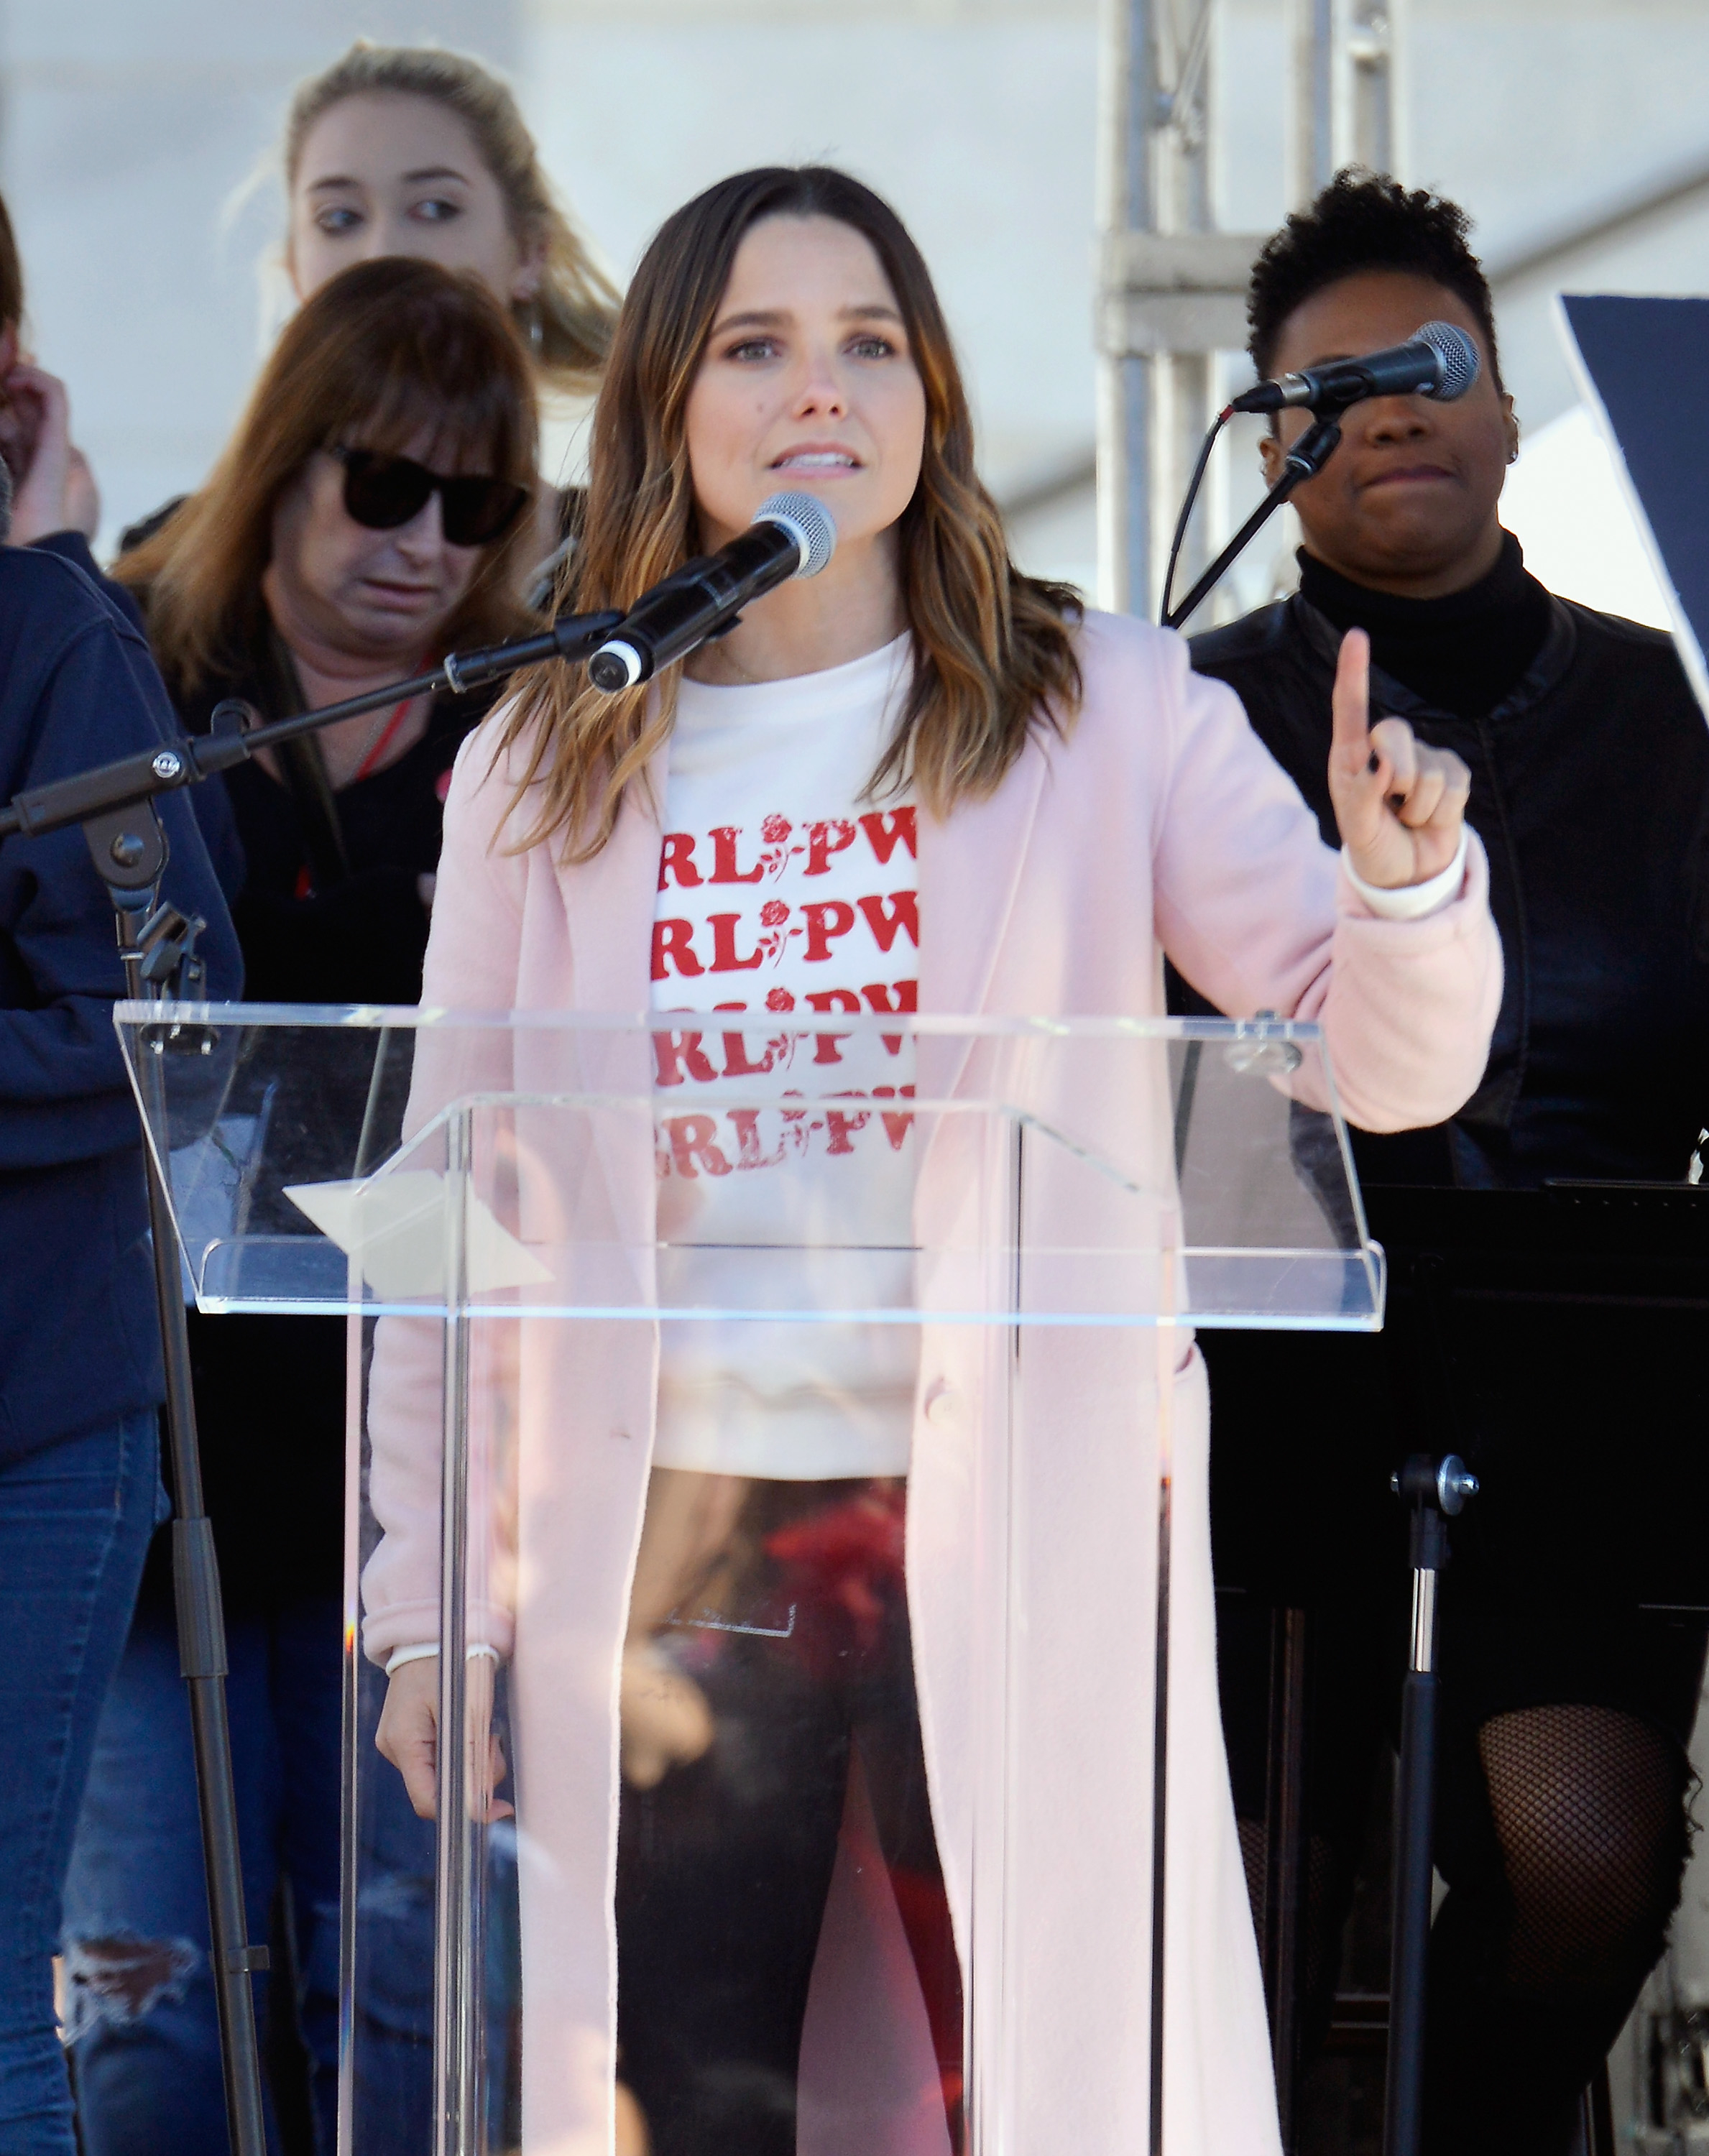 Sophia Bush at podium speaking into microphone with others in background. She wears a graphic tee and pink coat